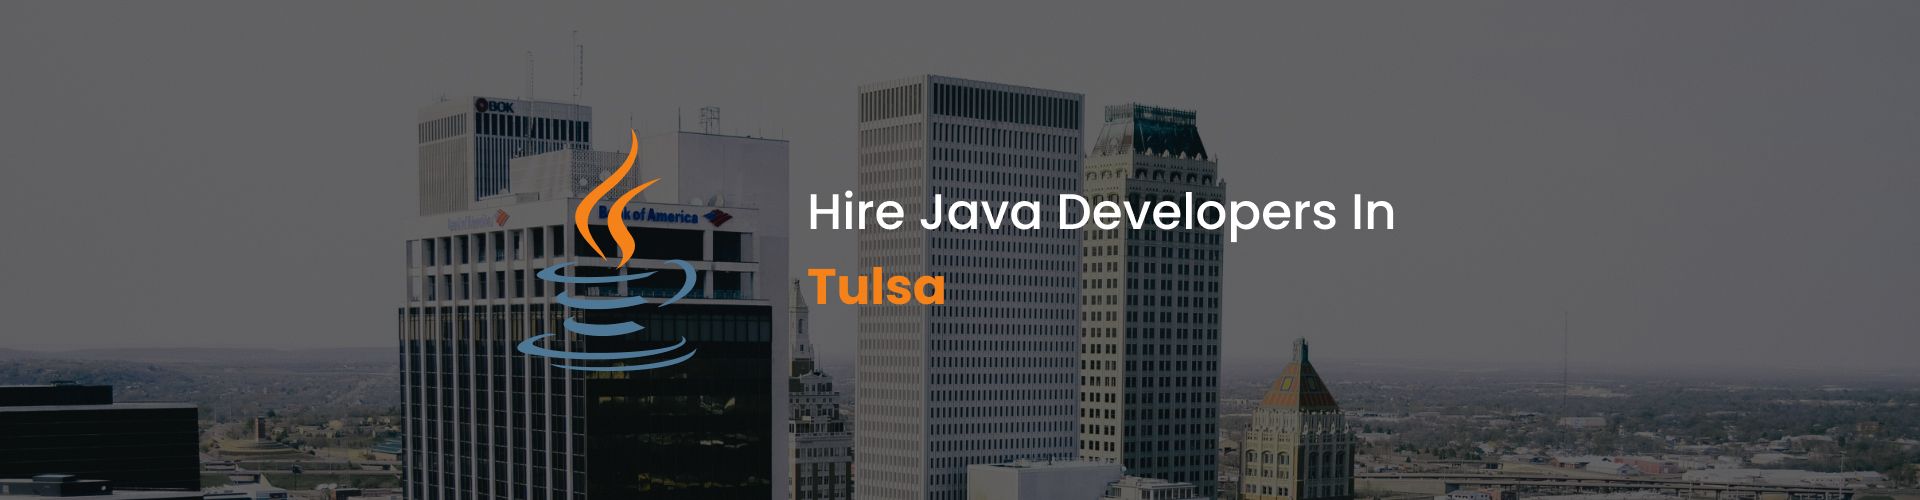 hire java developers in tulsa